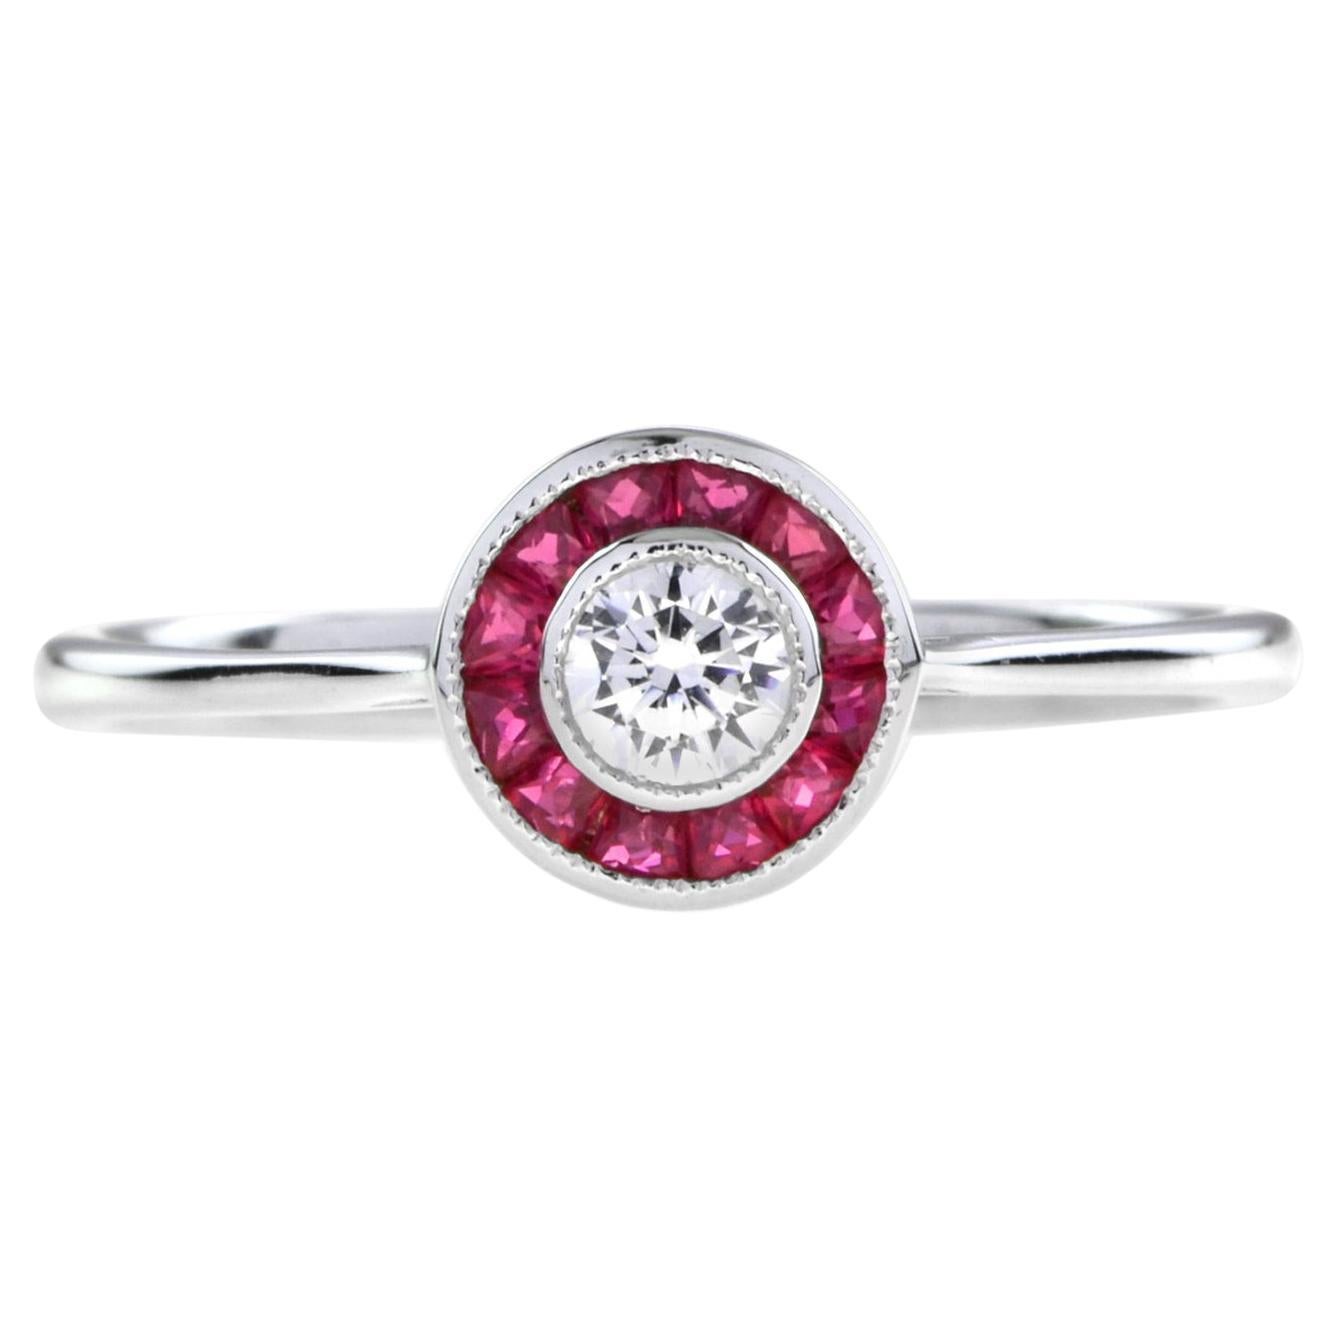 Art Deco Style Diamond and Ruby Target Ring in 18K White Gold